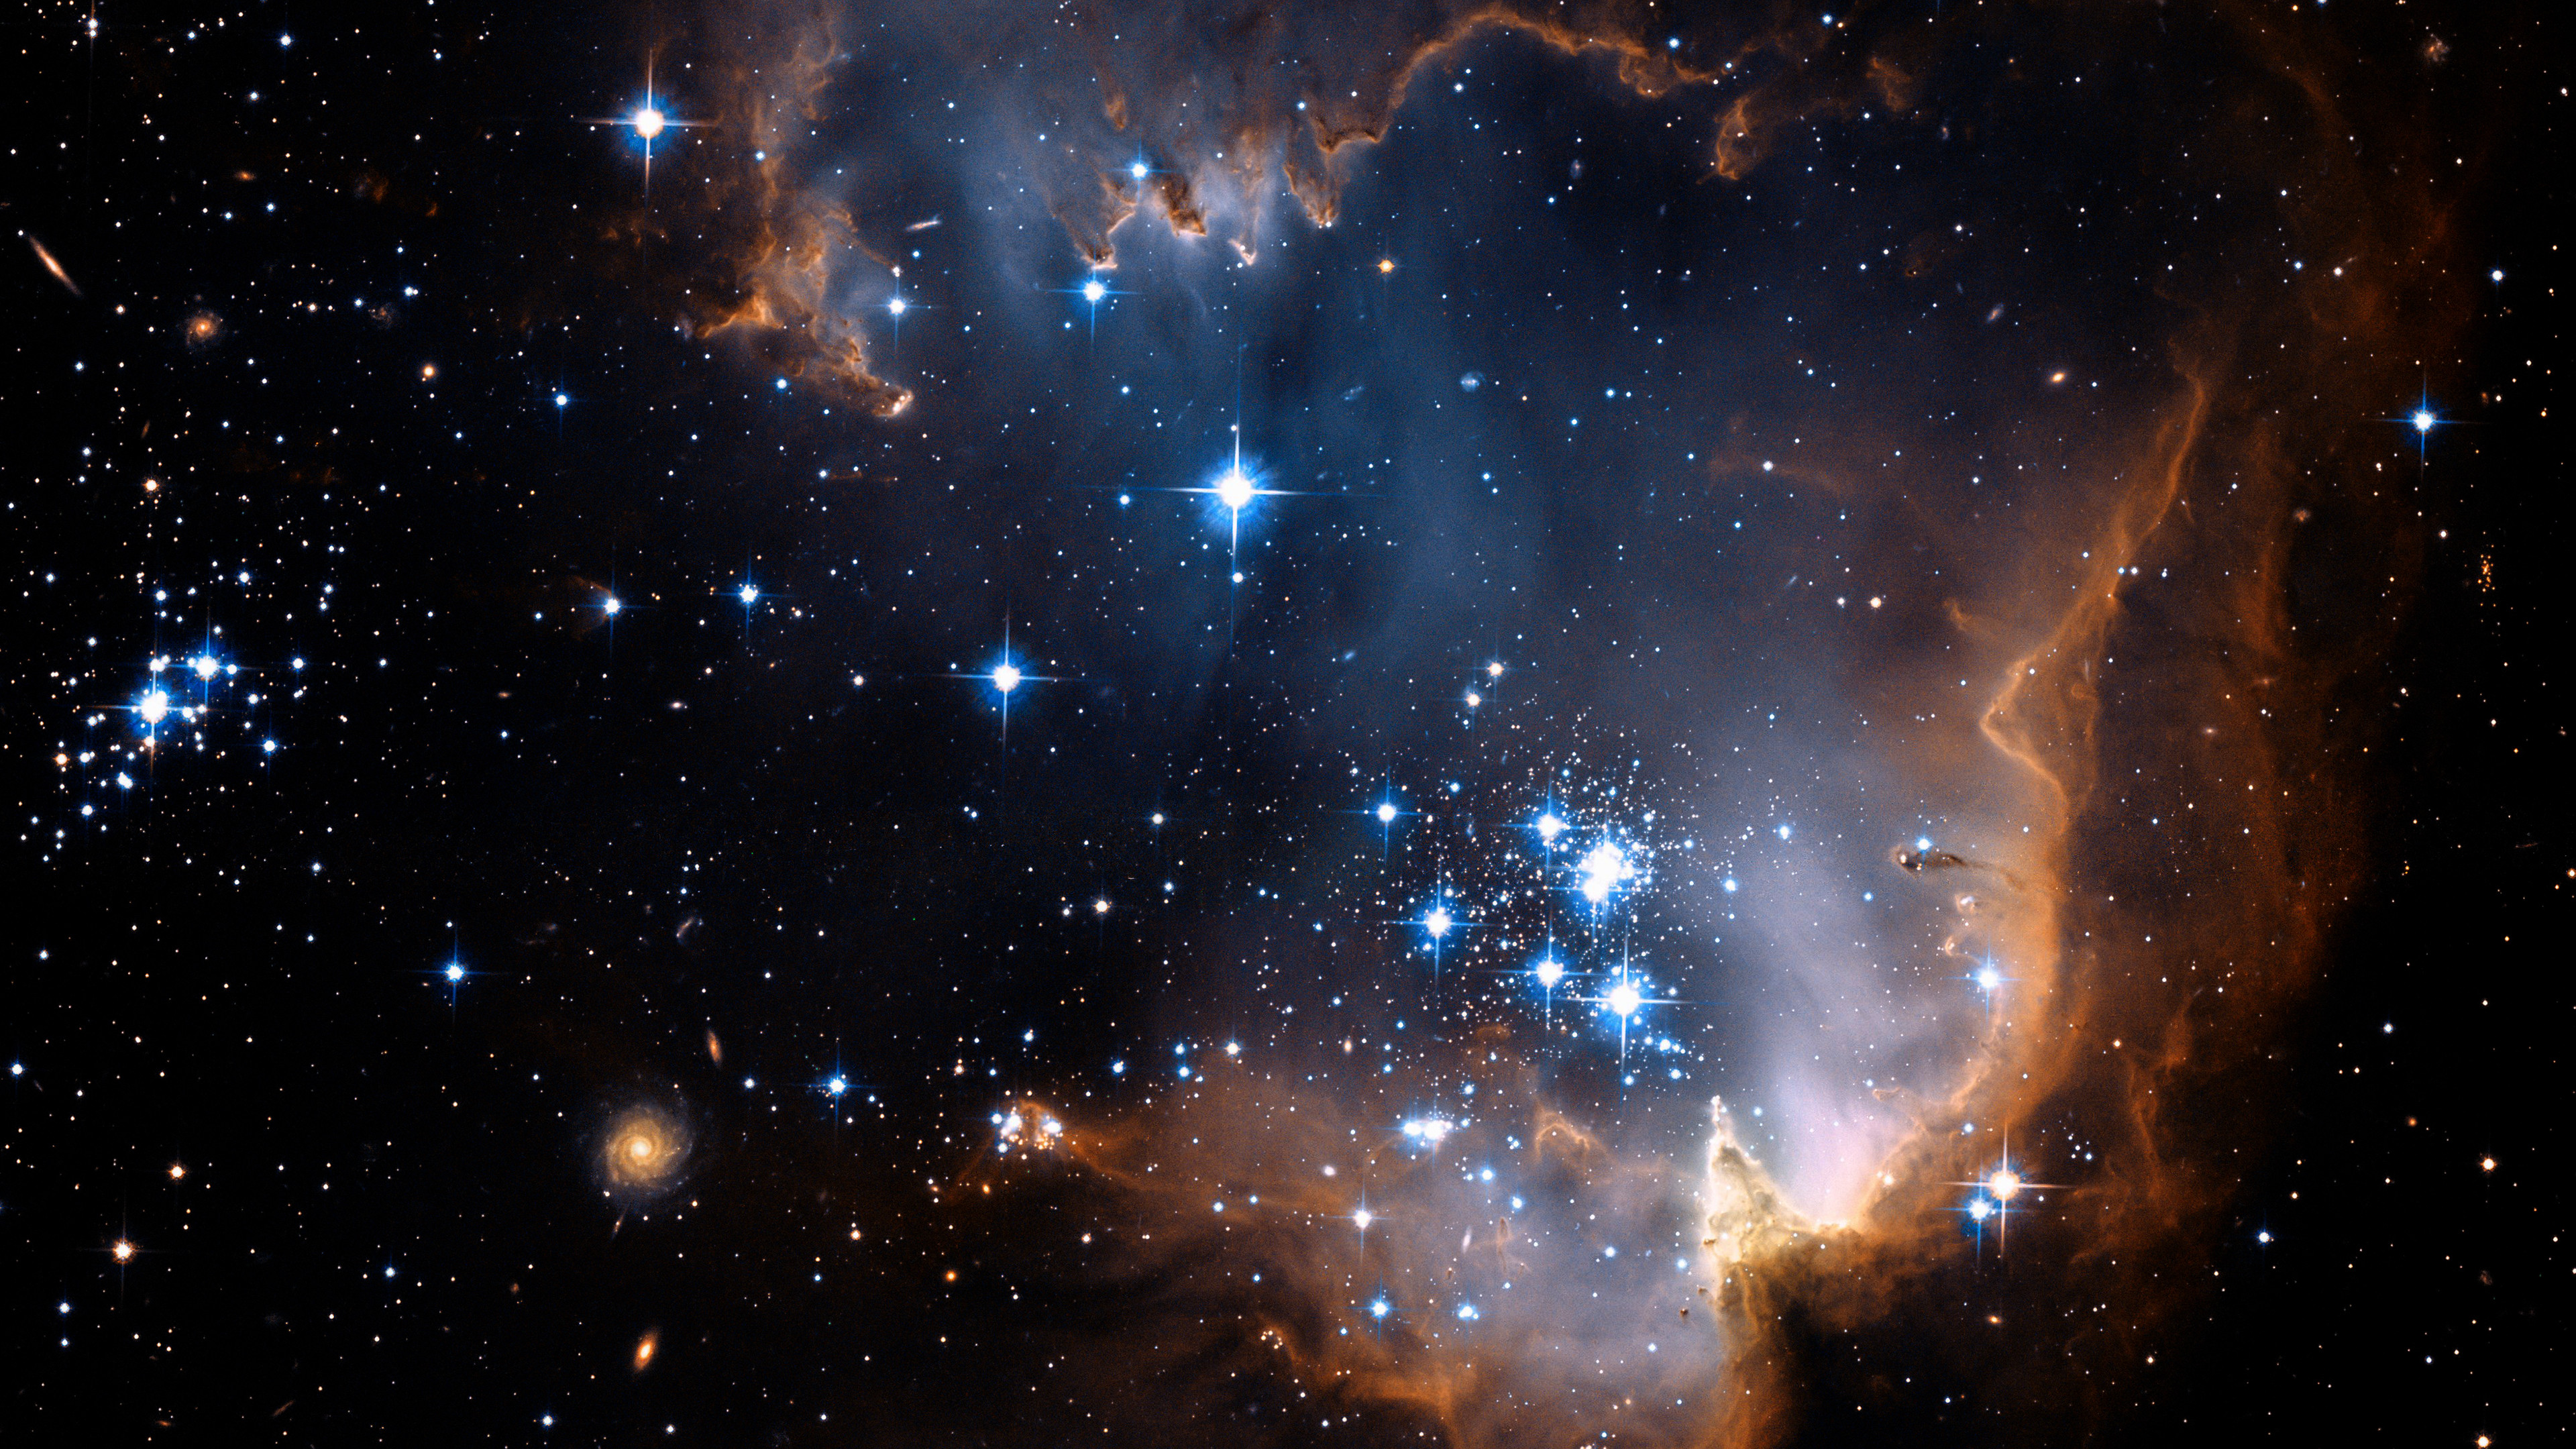 astronomy wallpaper,nebula,outer space,nature,sky,universe